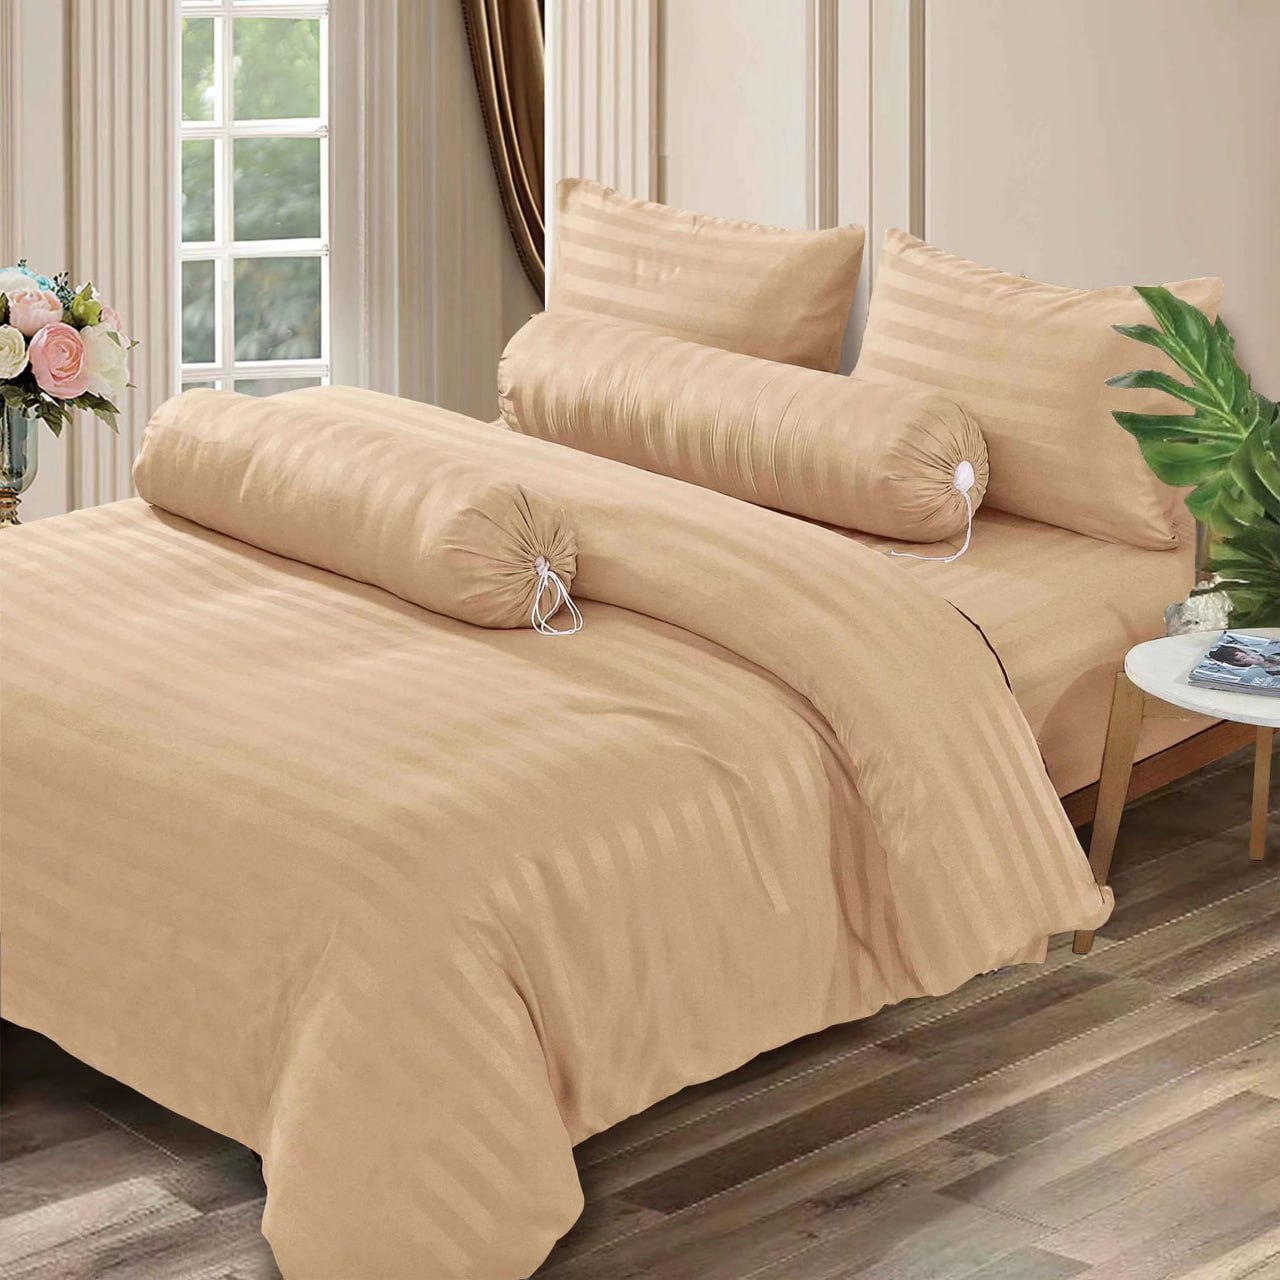 Microtex Queen Bedding Set with Pillow & Bolster Case